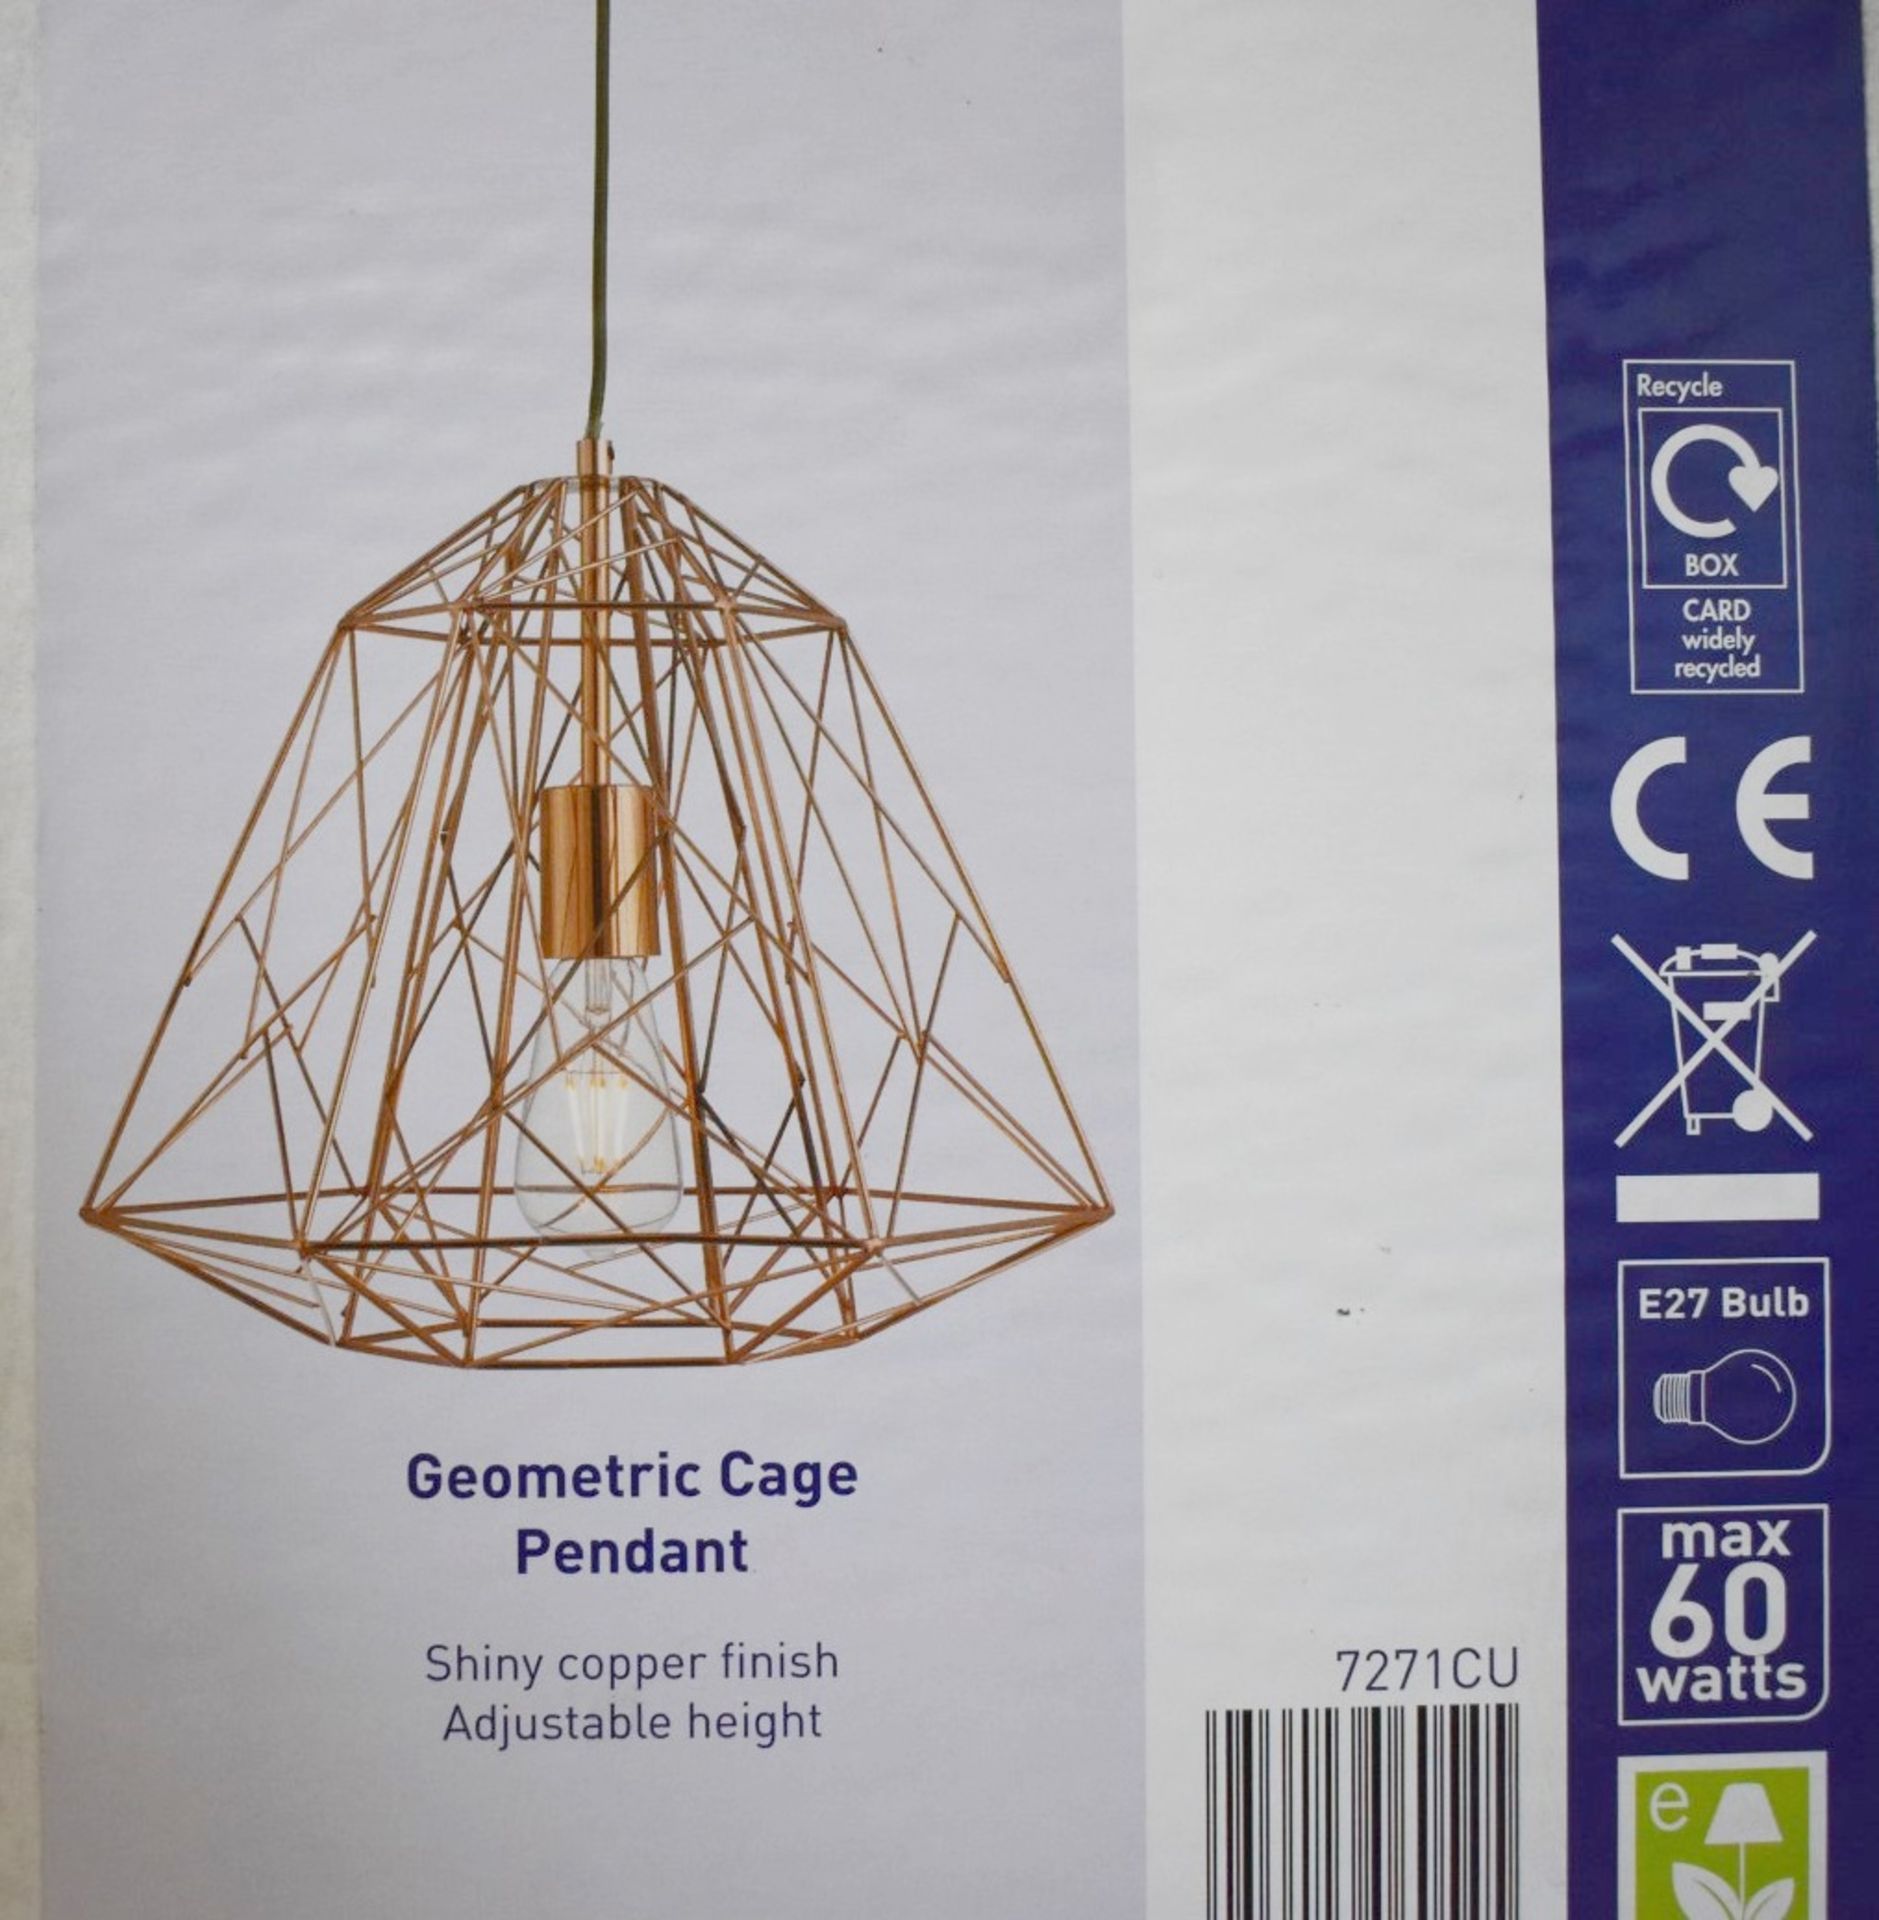 1 x Copper Geometric Cage Frame Pendant Light - New Boxed Stock - CL323 - Ref: 7271CU / PalH - Image 2 of 3